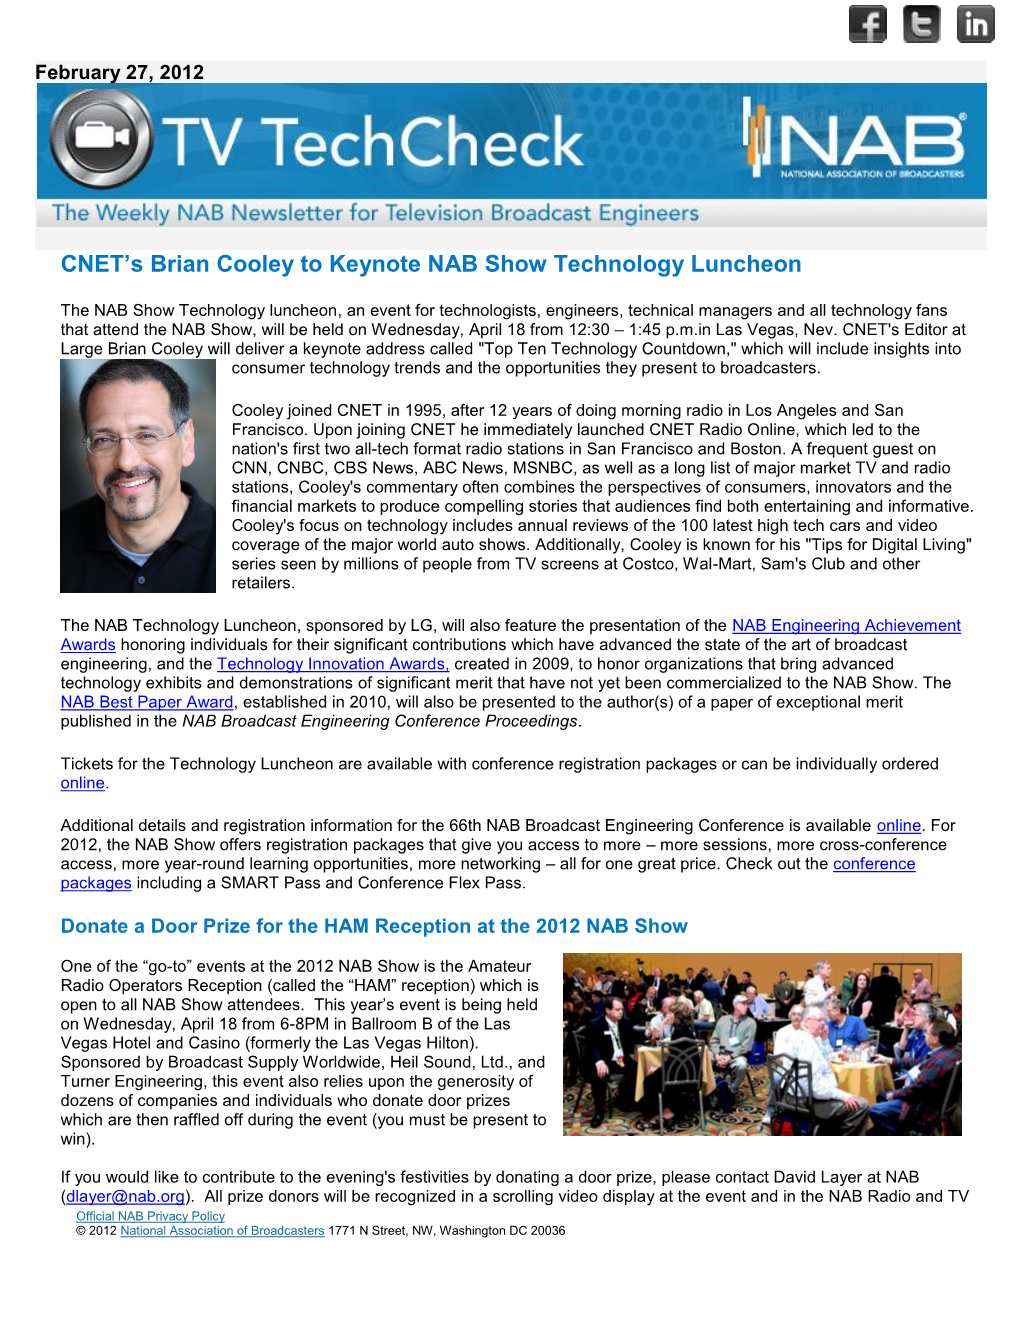 CNET's Brian Cooley to Keynote NAB Show Technology Luncheon